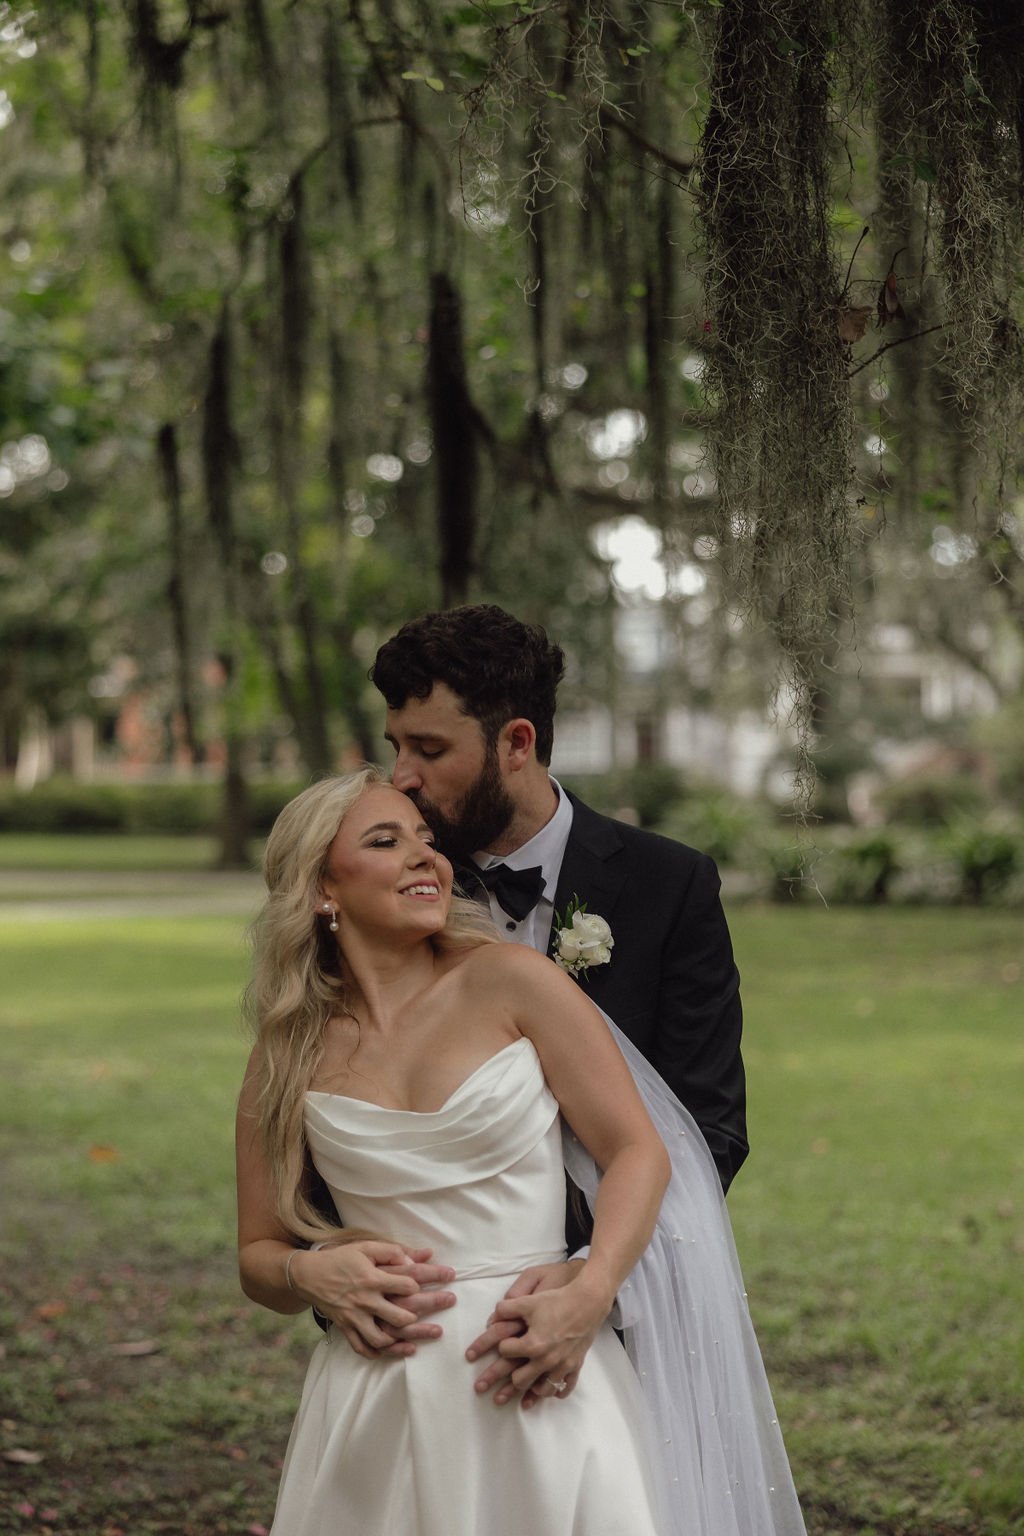 kayla-and-zachs-romantic-candlelit-wedding-in-savannah-ga-at-savannah-station-featuring-wedding-planning-and-florals-by-ivory-and-beau-2.jpg